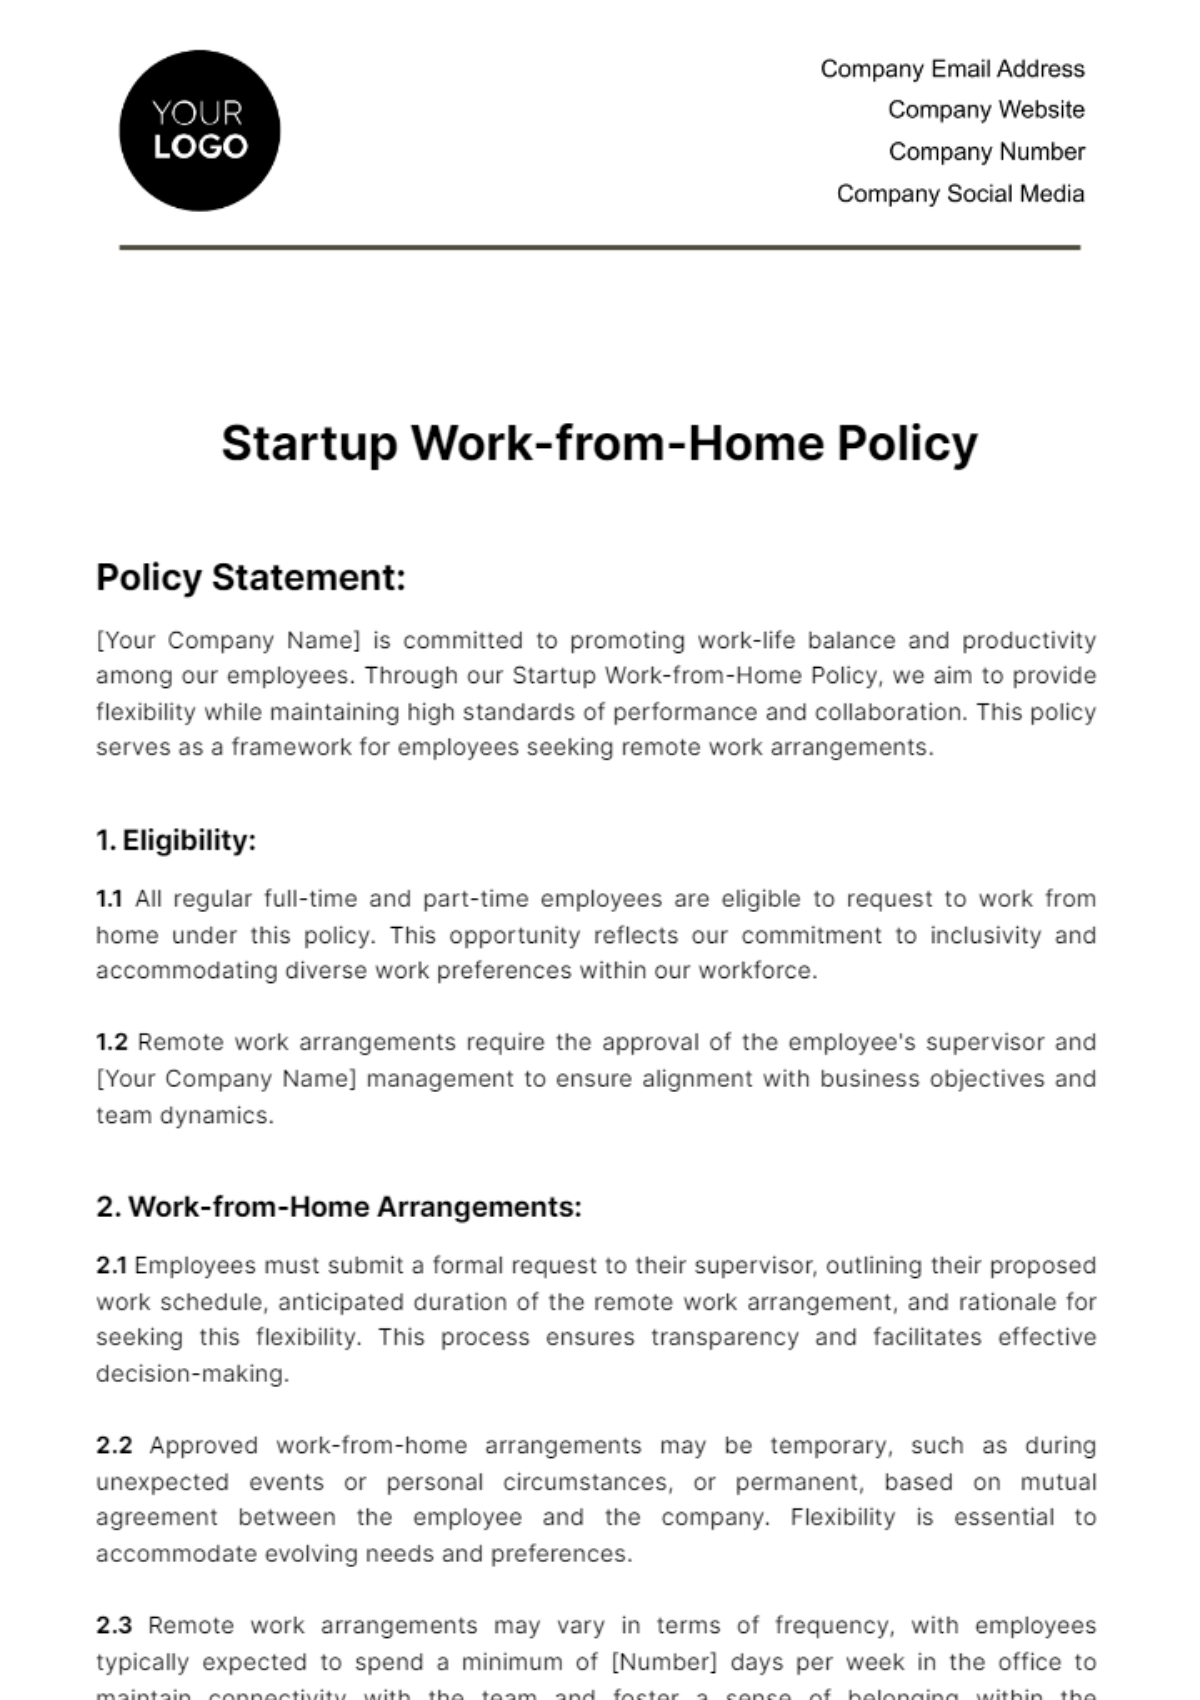 Startup Work-from-Home Policy Template